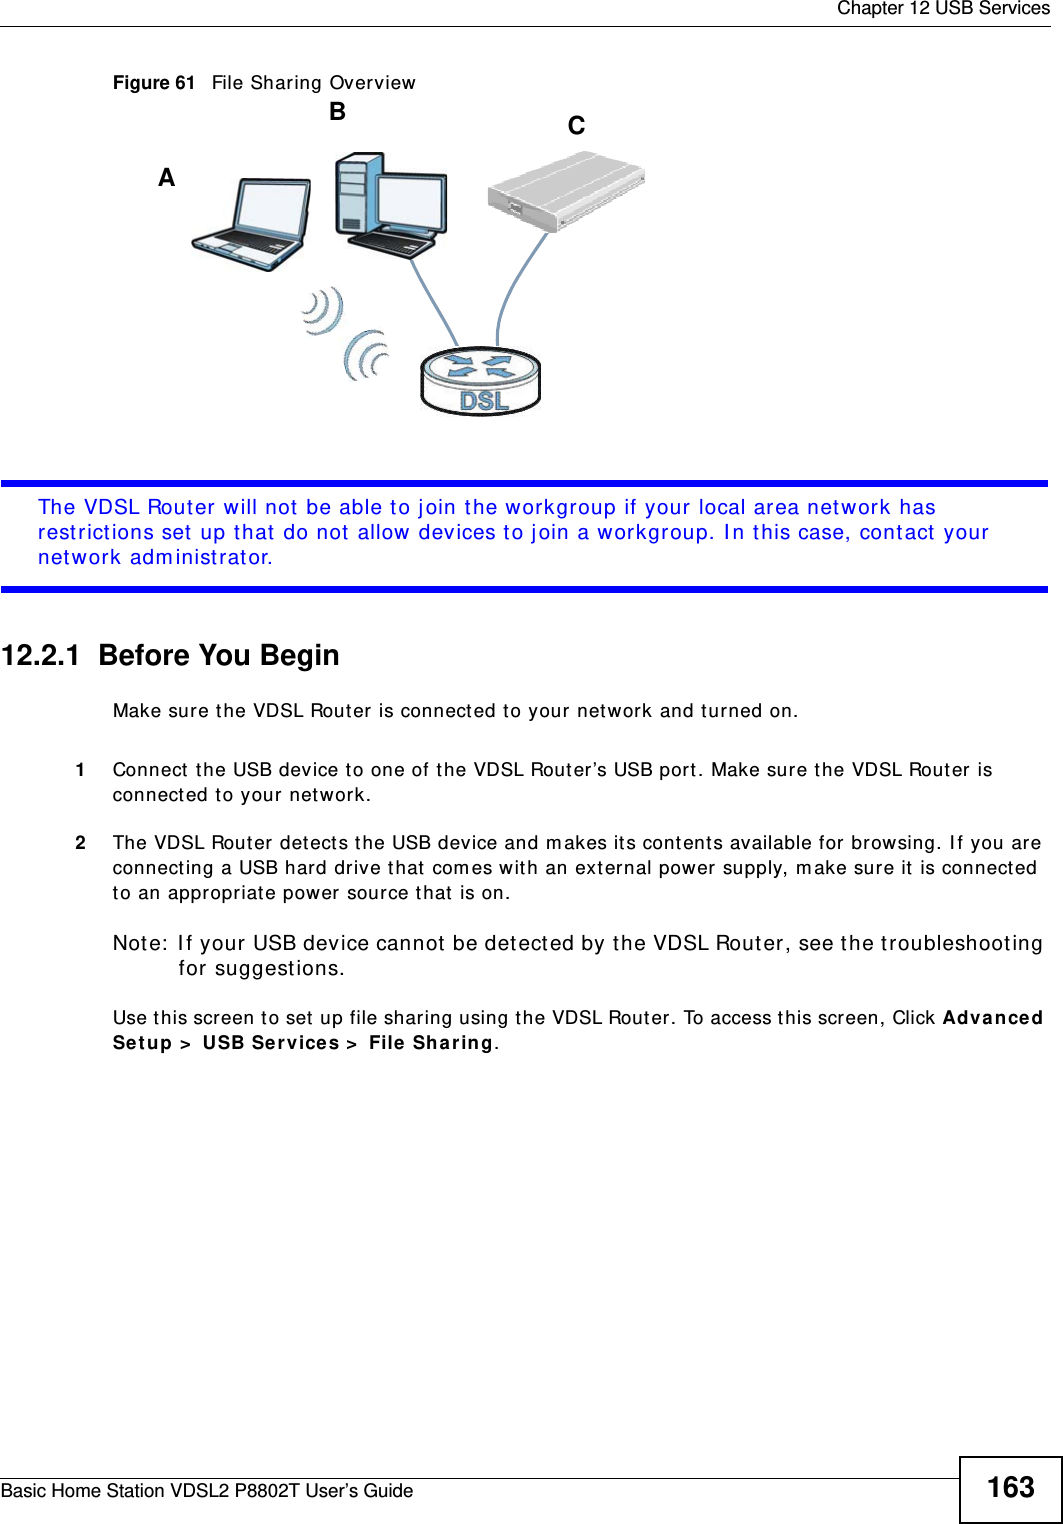  Chapter 12 USB ServicesBasic Home Station VDSL2 P8802T User’s Guide 163Figure 61   File Sharing OverviewThe VDSL Router will not be able t o join t he workgroup if your local area net work has rest rict ions set up that  do not allow devices to j oin a workgroup. I n t his case, cont act your netw ork adm inist rator.12.2.1  Before You BeginMake sure the VDSL Rout er  is connect ed t o your net work and turned on.1Connect  the USB device t o one of t he VDSL Router’s USB port . Make sure the VDSL Rout er is connect ed to your network.2The VDSL Router detect s t he USB device and m akes it s contents available for browsing. I f you are connect ing a USB hard drive t hat  com es wit h an ext ernal power supply, m ake sure it is connect ed to an appropriate power source t hat  is on.Note:  I f your USB device cannot be det ect ed by t he VDSL Router, see the t roubleshoot ing for suggest ions. Use t his screen t o set  up file sharing using t he VDSL Router. To access t his screen, Click Adva nced Se t up &gt;  USB Se rvices &gt;  File  Sha r ing.ABC